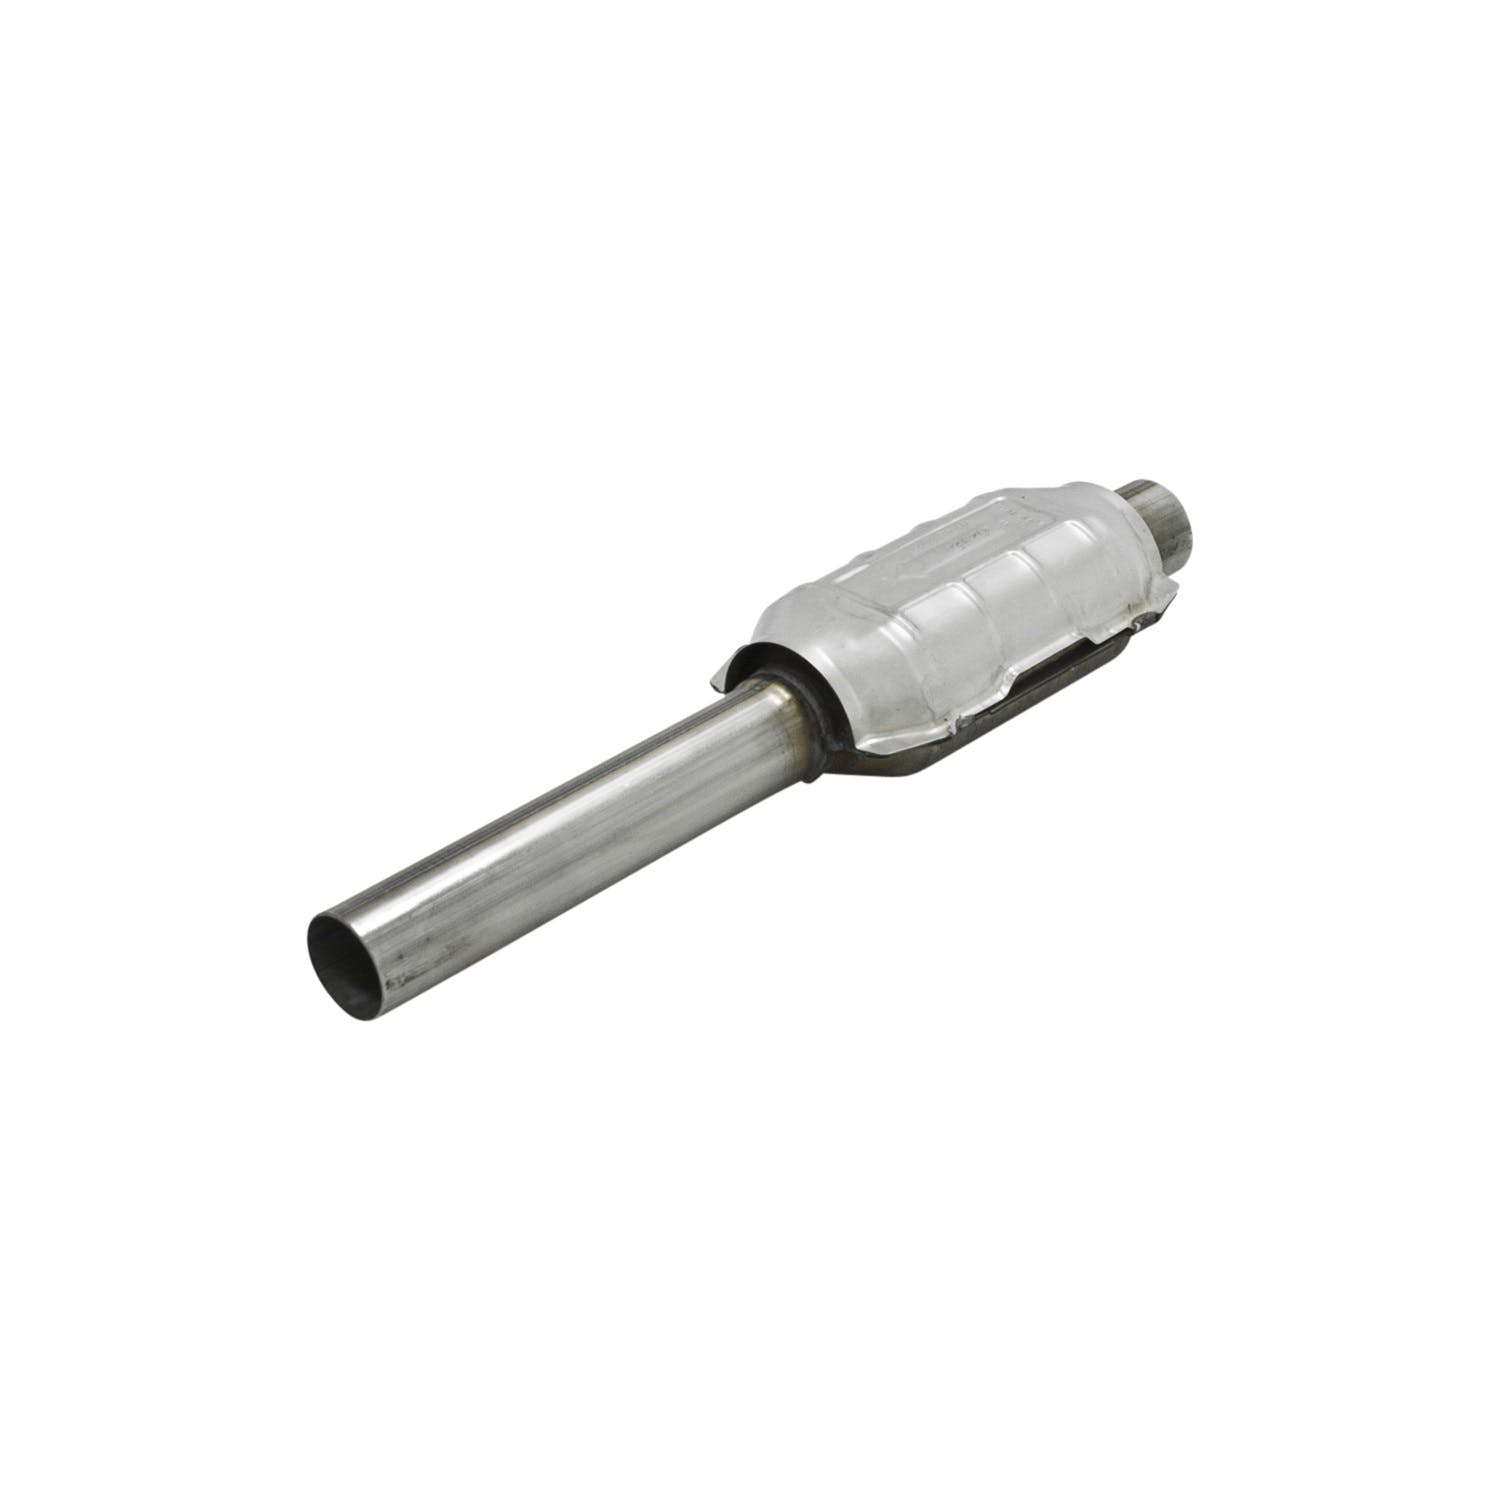 Flowmaster Catalytic Converters 2040002 Catalytic Converter-Direct Fit-2.50 in Inlet/2.25 in. Outlet-49 State